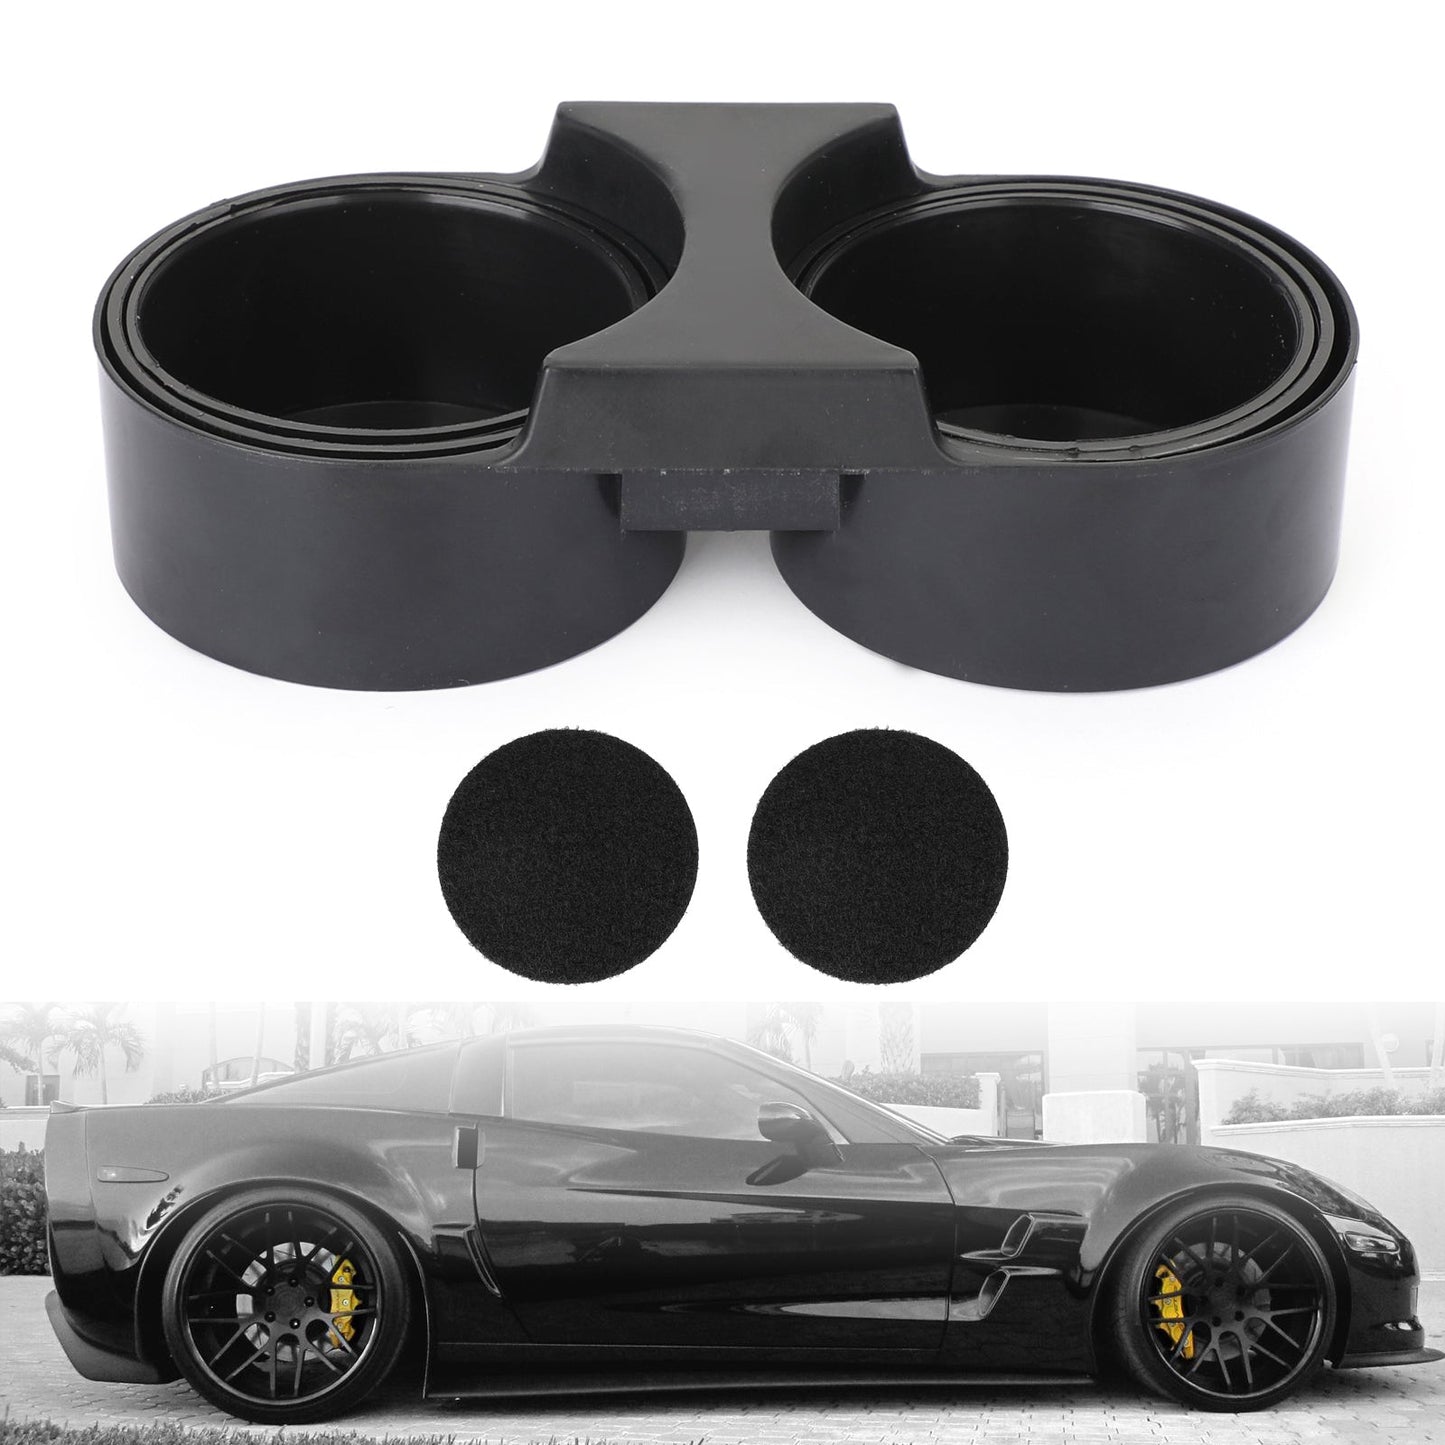 Duel Extendable And Retractable Cup Holder Fit For Chevrolet C7 Corvette 2014-2019